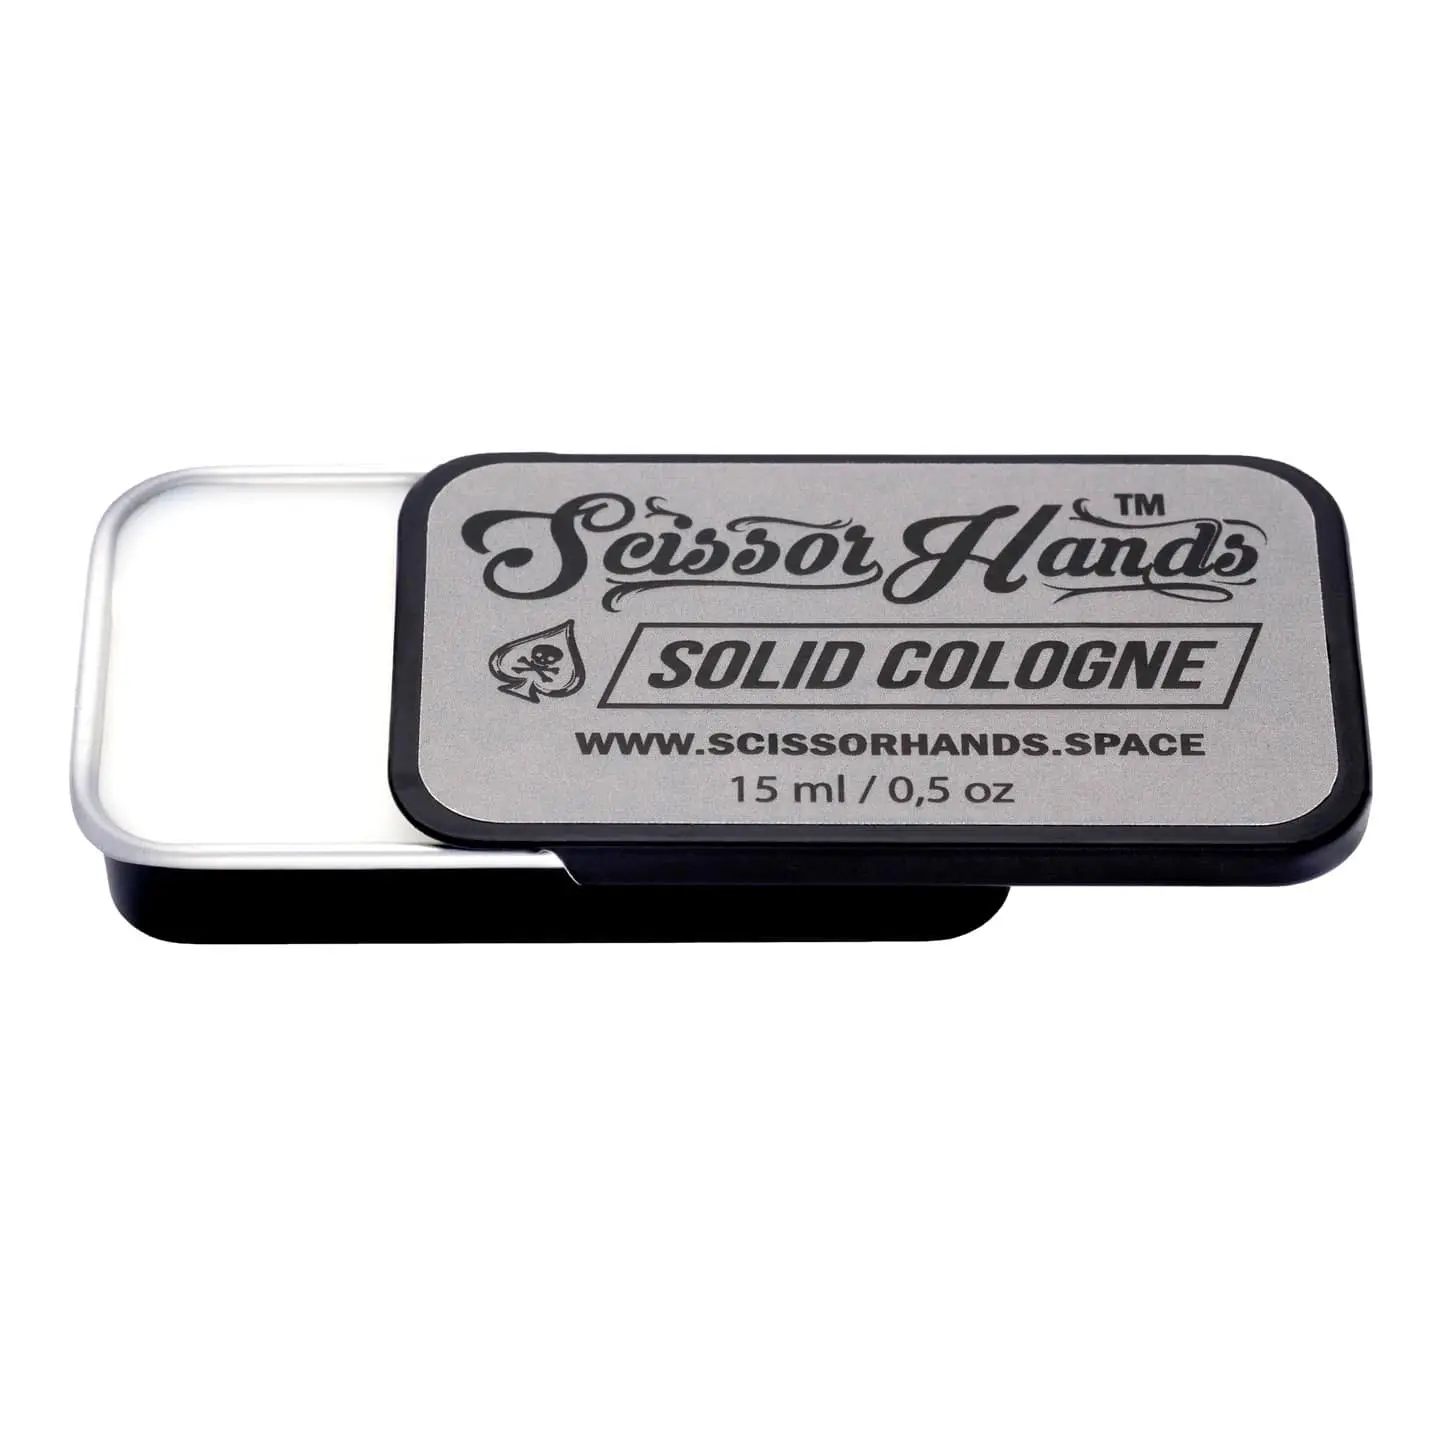 Solid cologne Gray